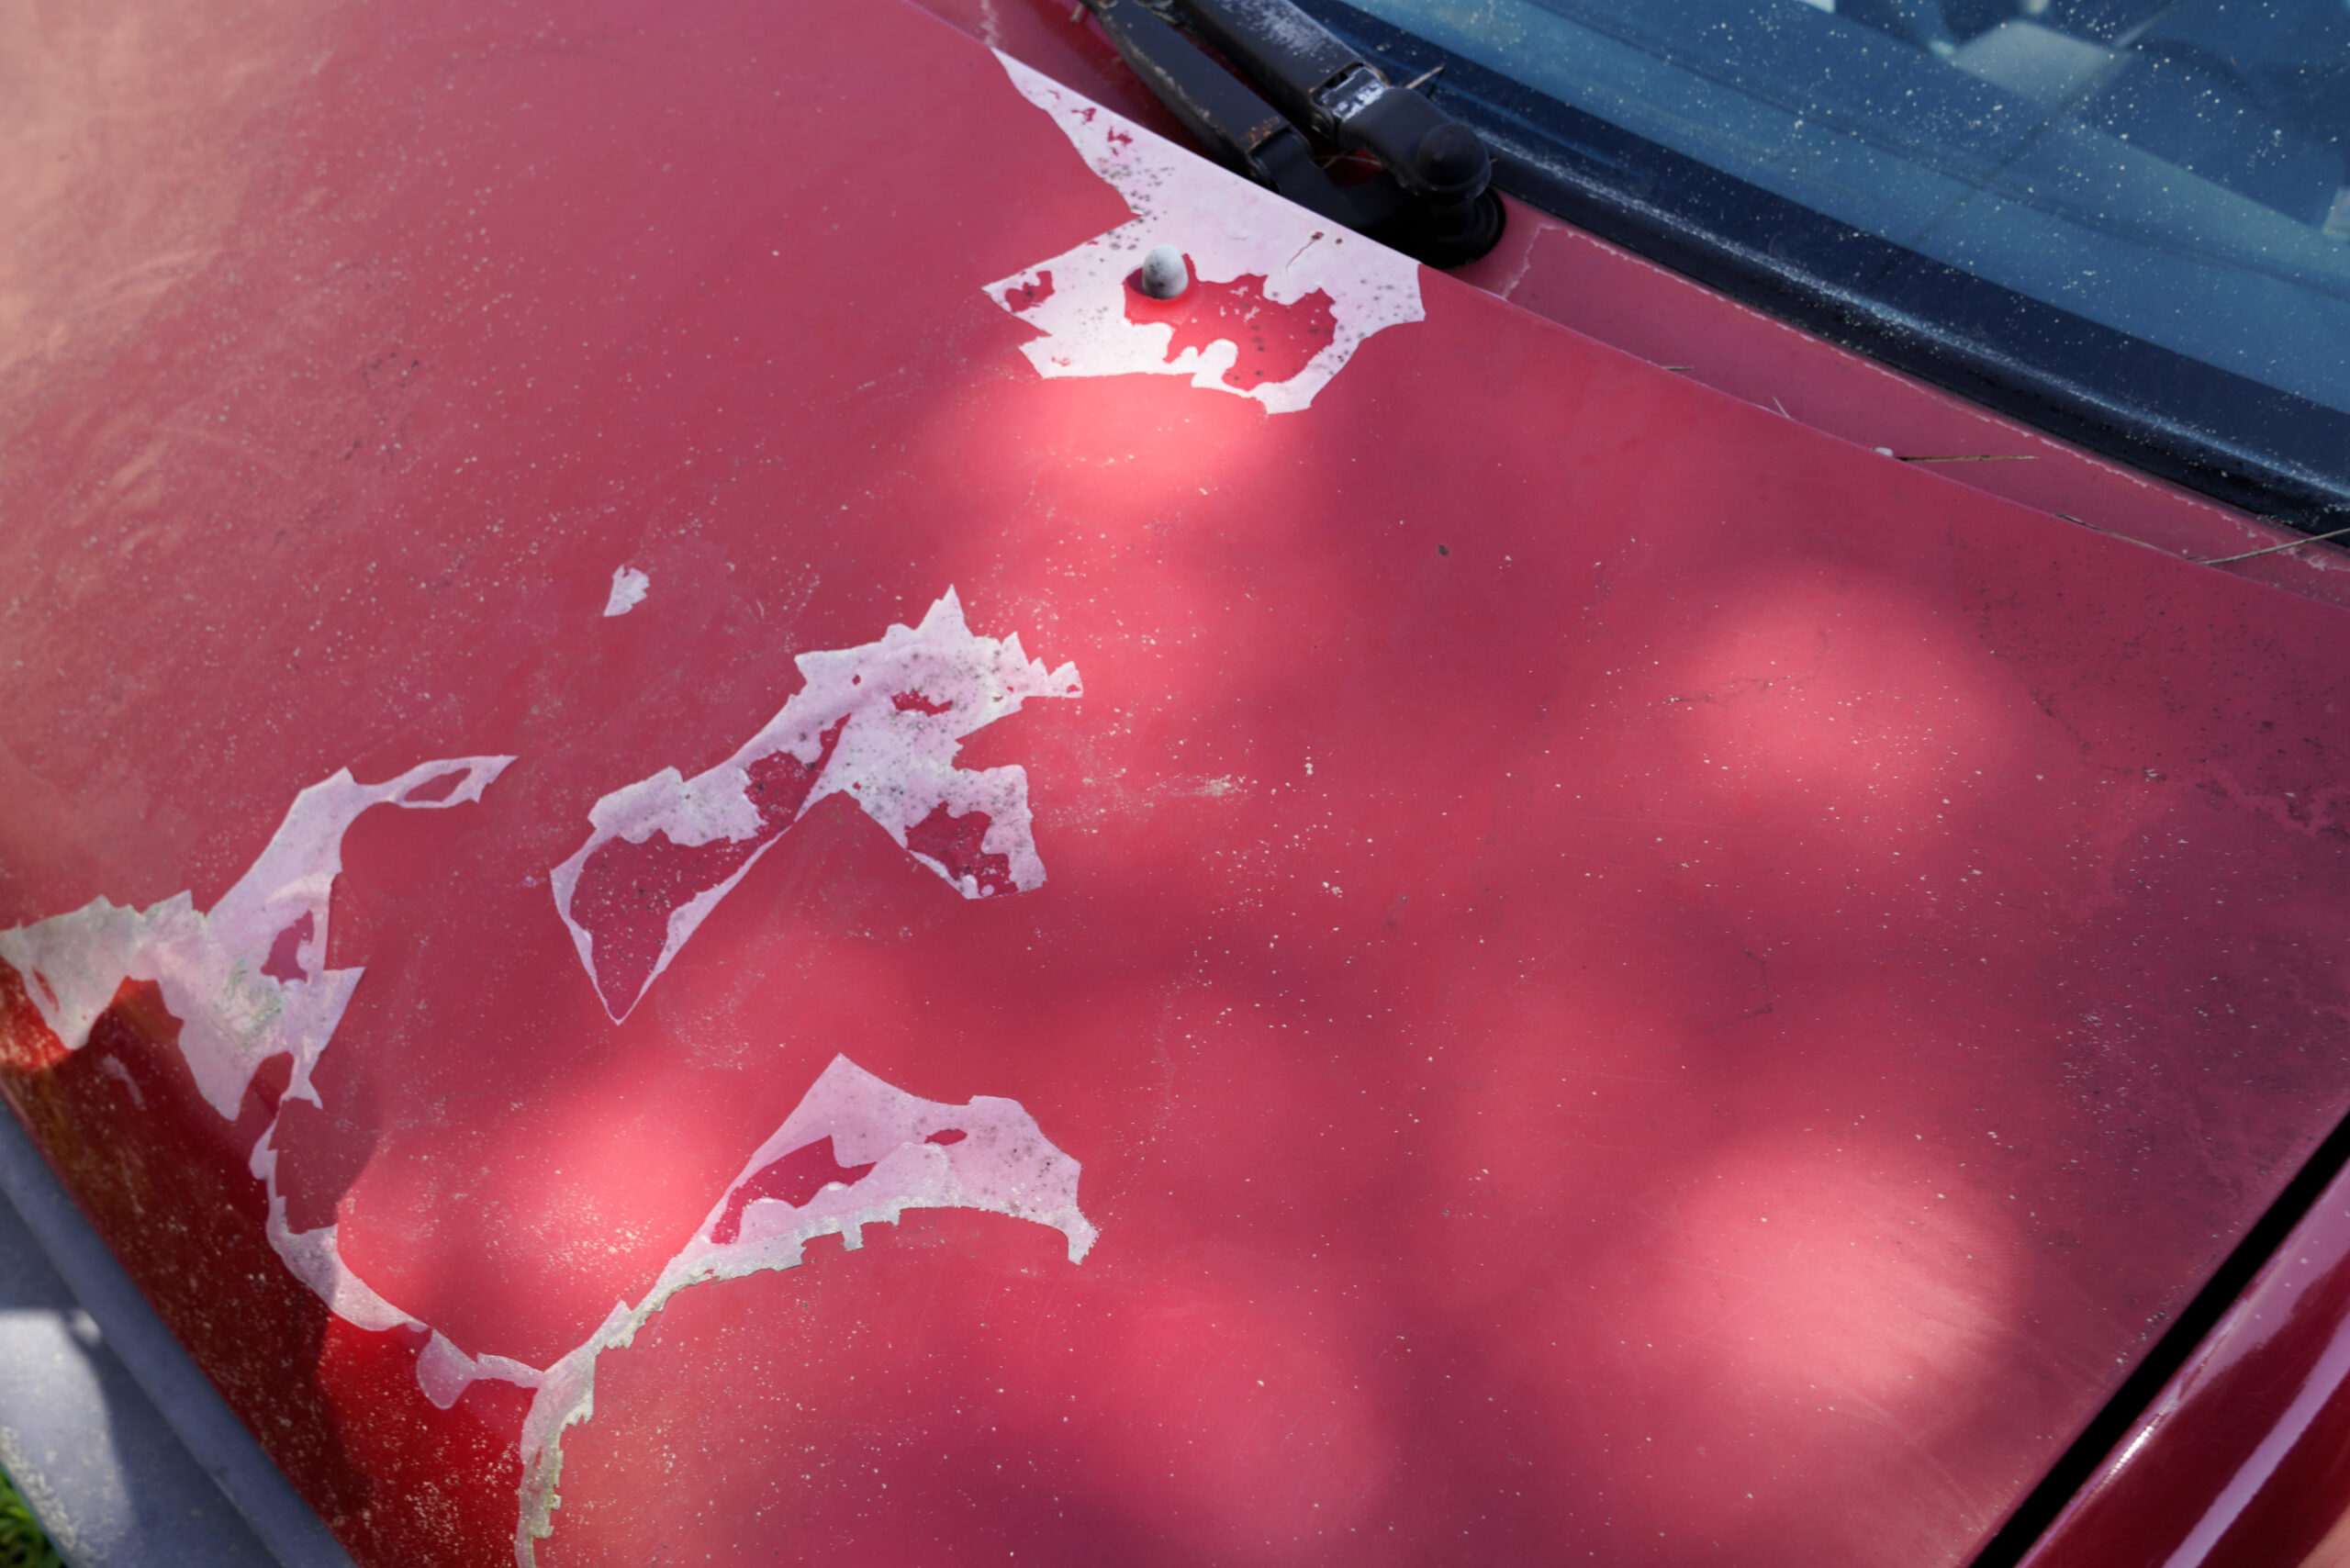 old car engine hood red used paint faded grunge on front bonnet